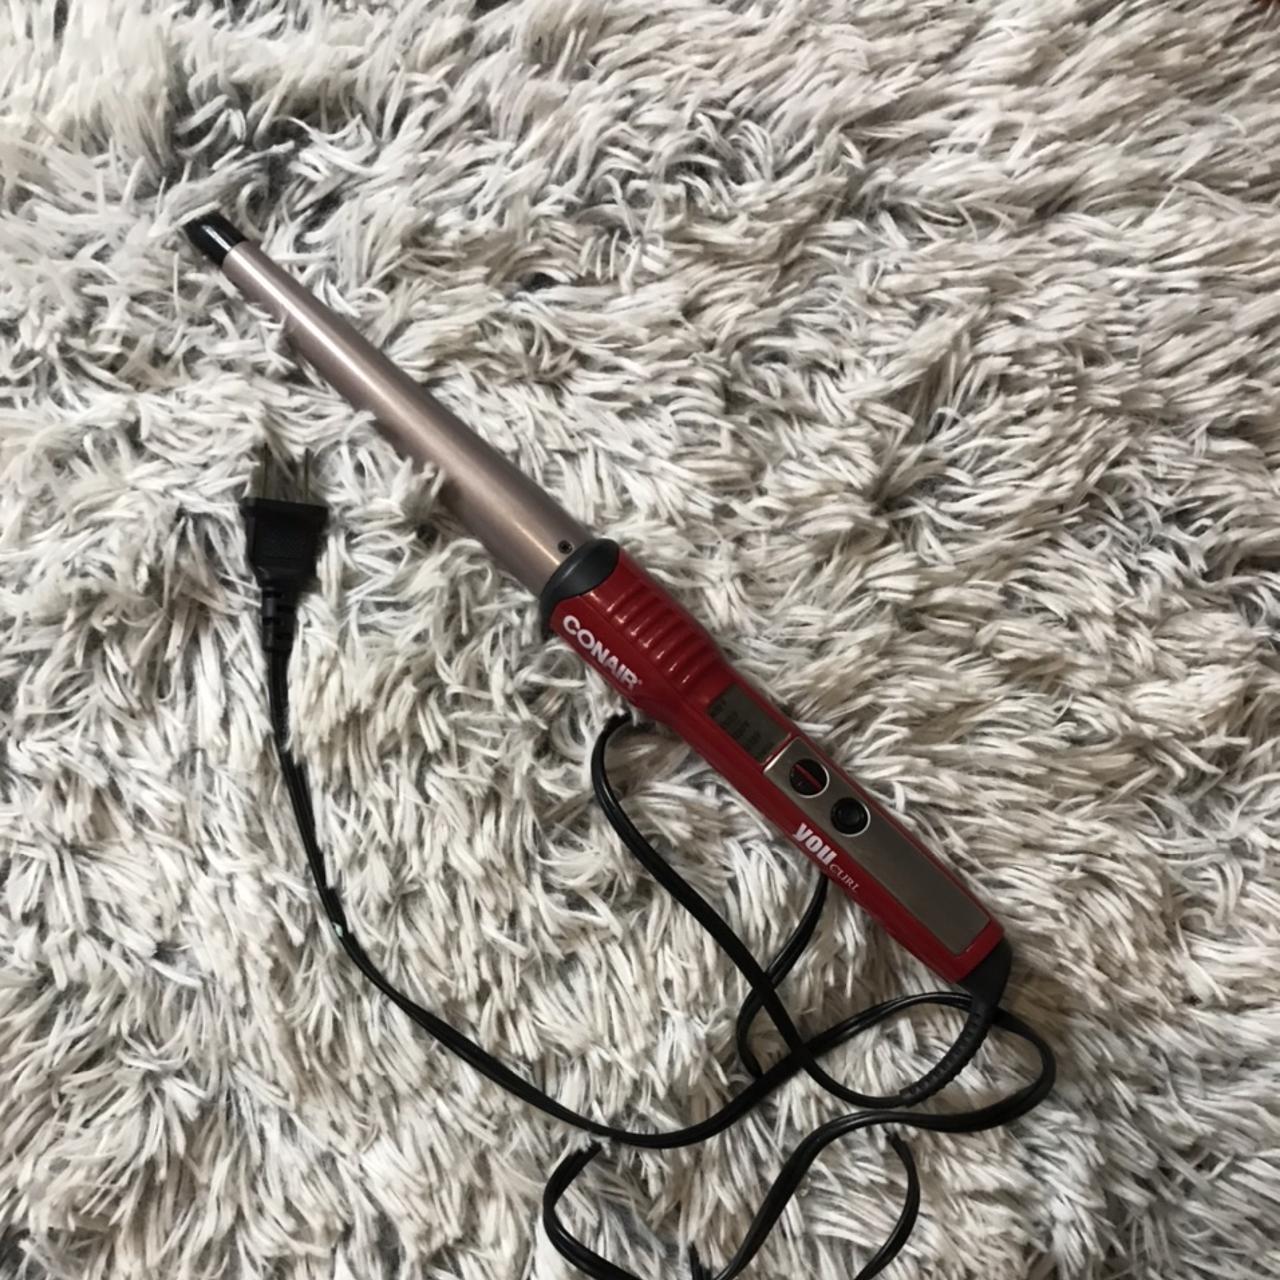 Product Image 1 - CONAIR You Curl wand. Rarely